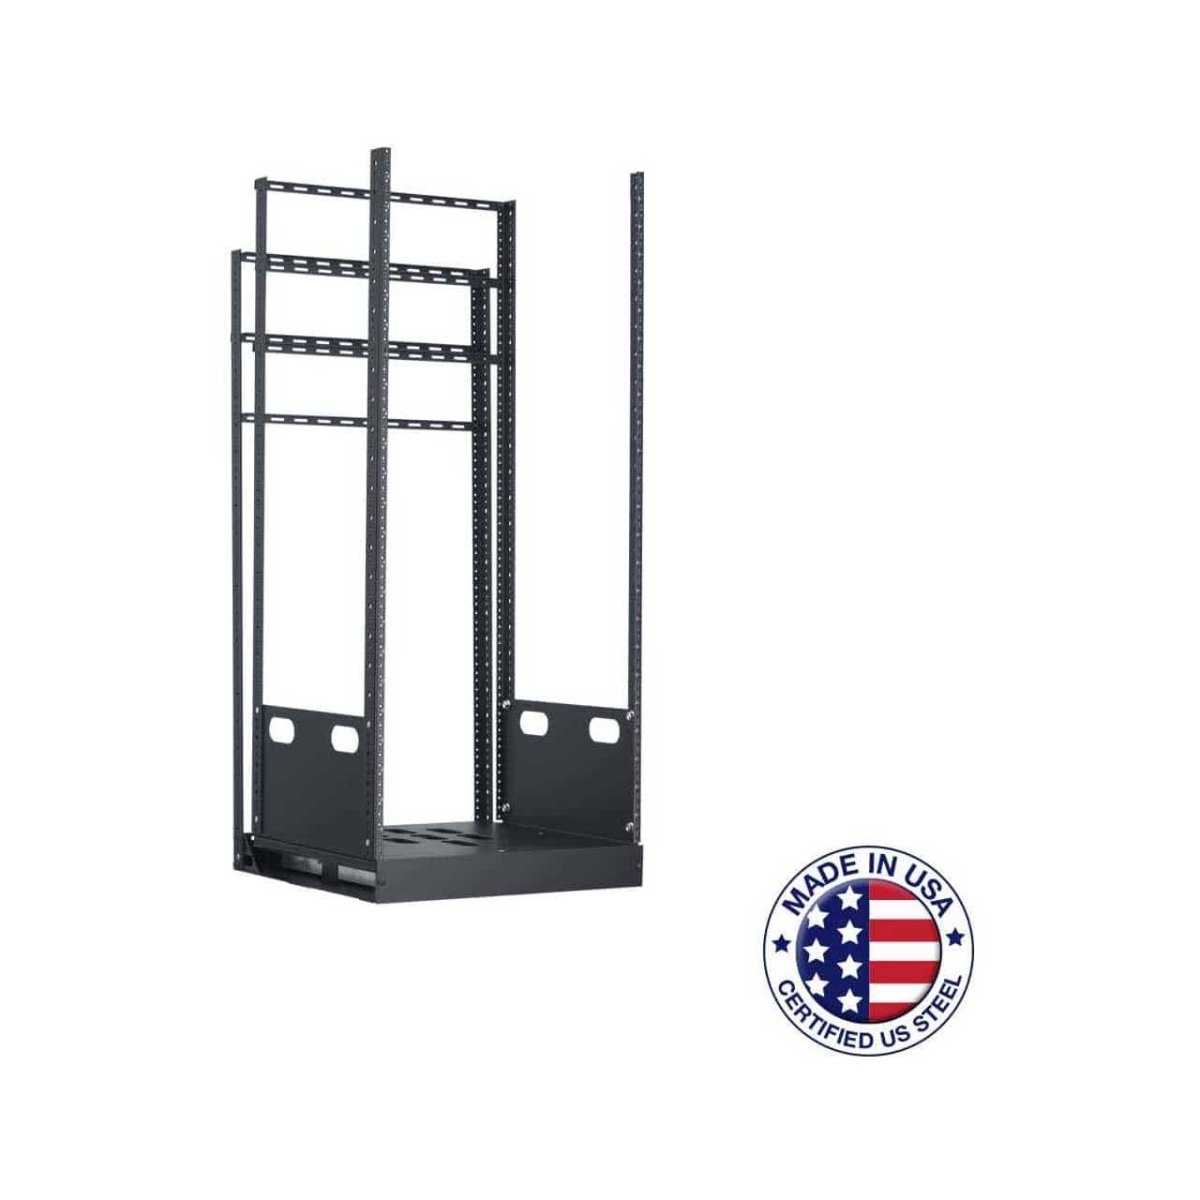 Picture of Lowell Manufacturing LMC-LPTR2-2419 LPTR2-2419 24RU Pull & Turn Millwork Rack with Two Support Rails - 19 in. Deep